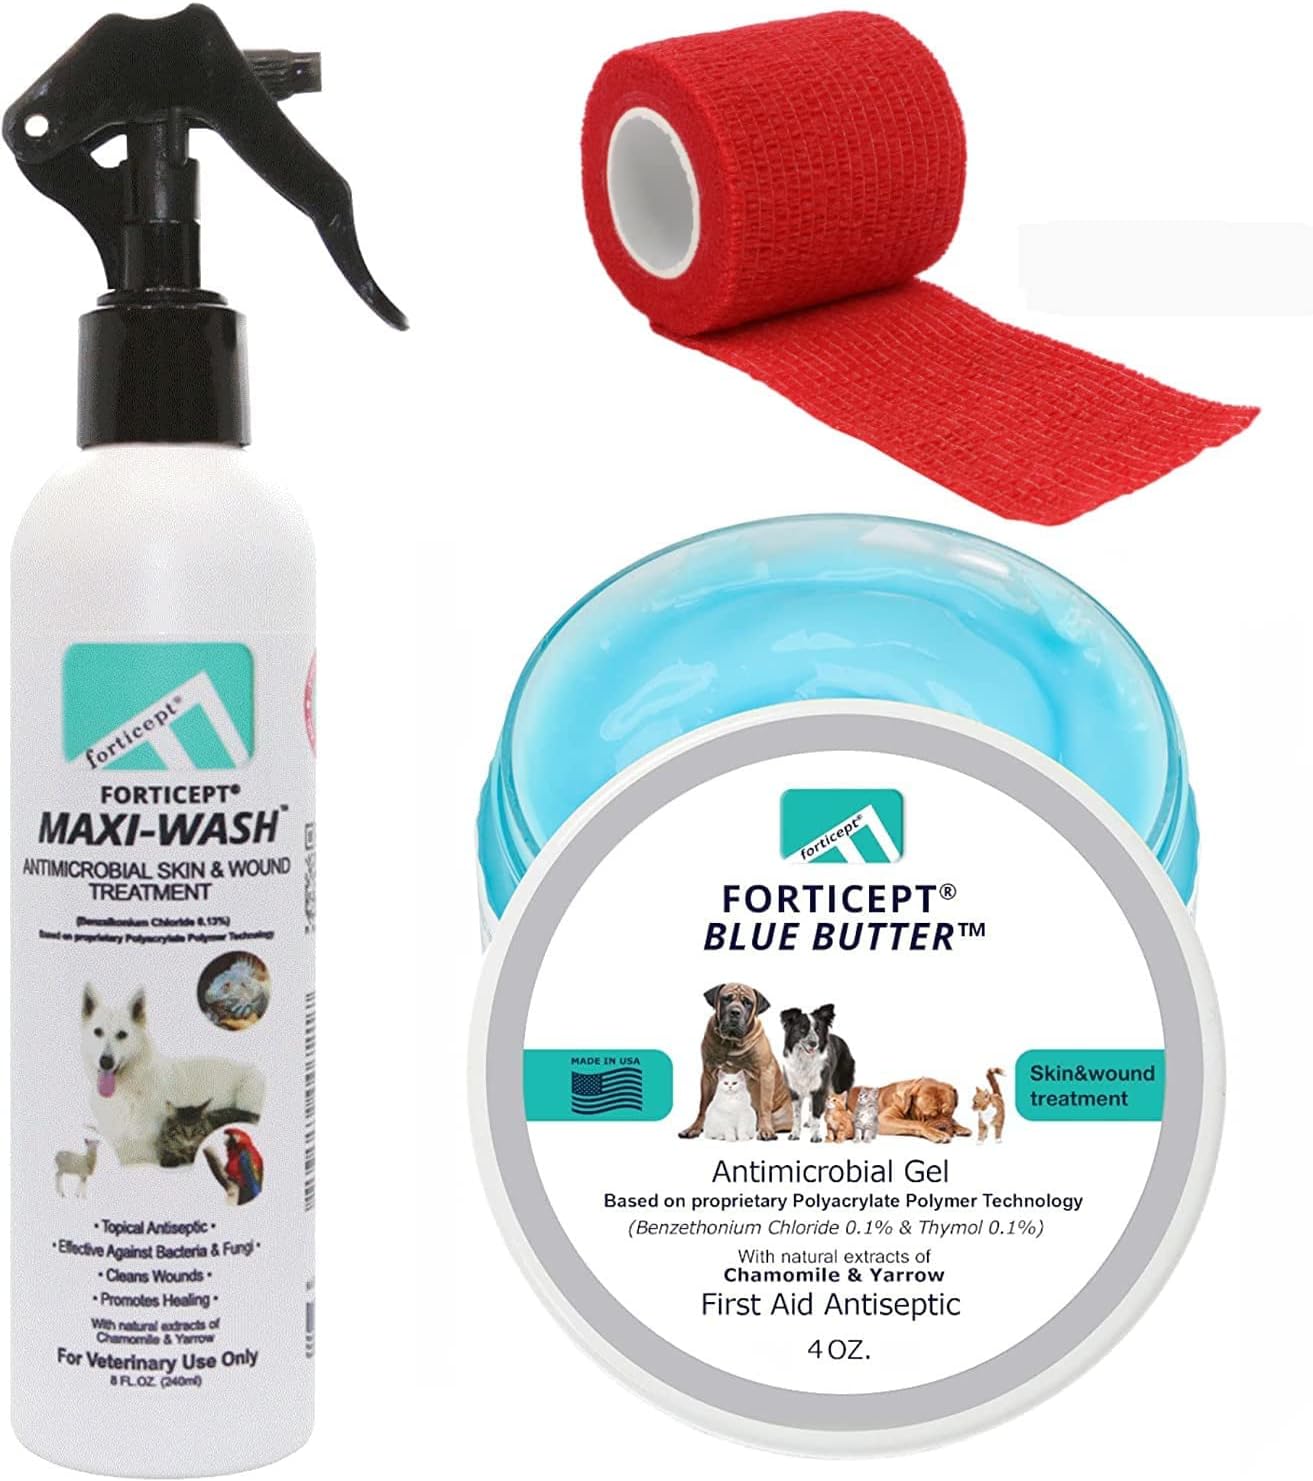 Forticept Hot Spot Treatment and Wound Care Kit for [...]